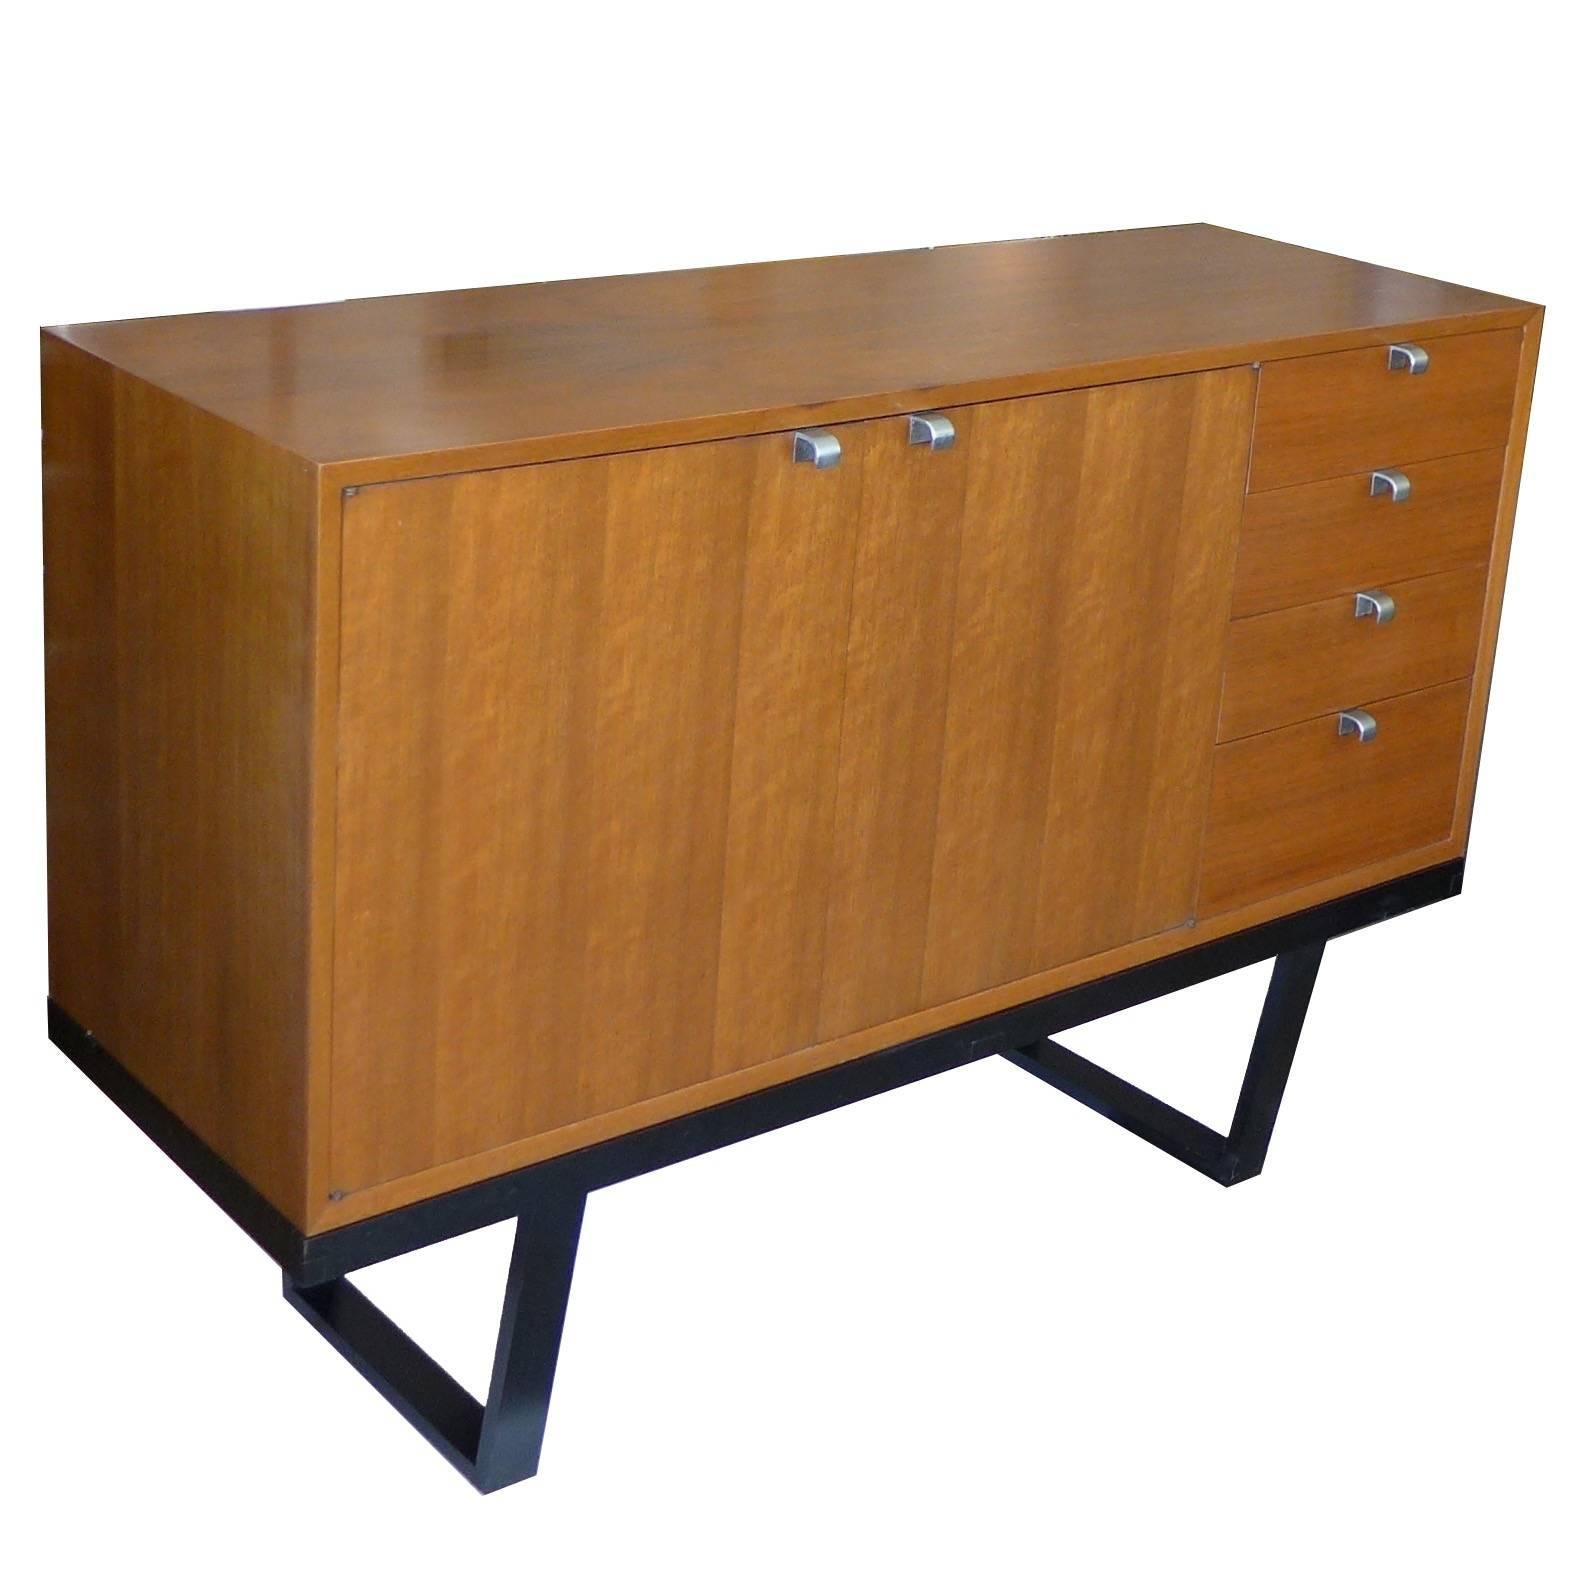 Wonderful all original walnut basic storage unit designed by George Nelson for Herman Miller in 1946. This unit features four drawers and includes a two-door section with the original adjustable shelf. The unit itself is 24" tall. The total